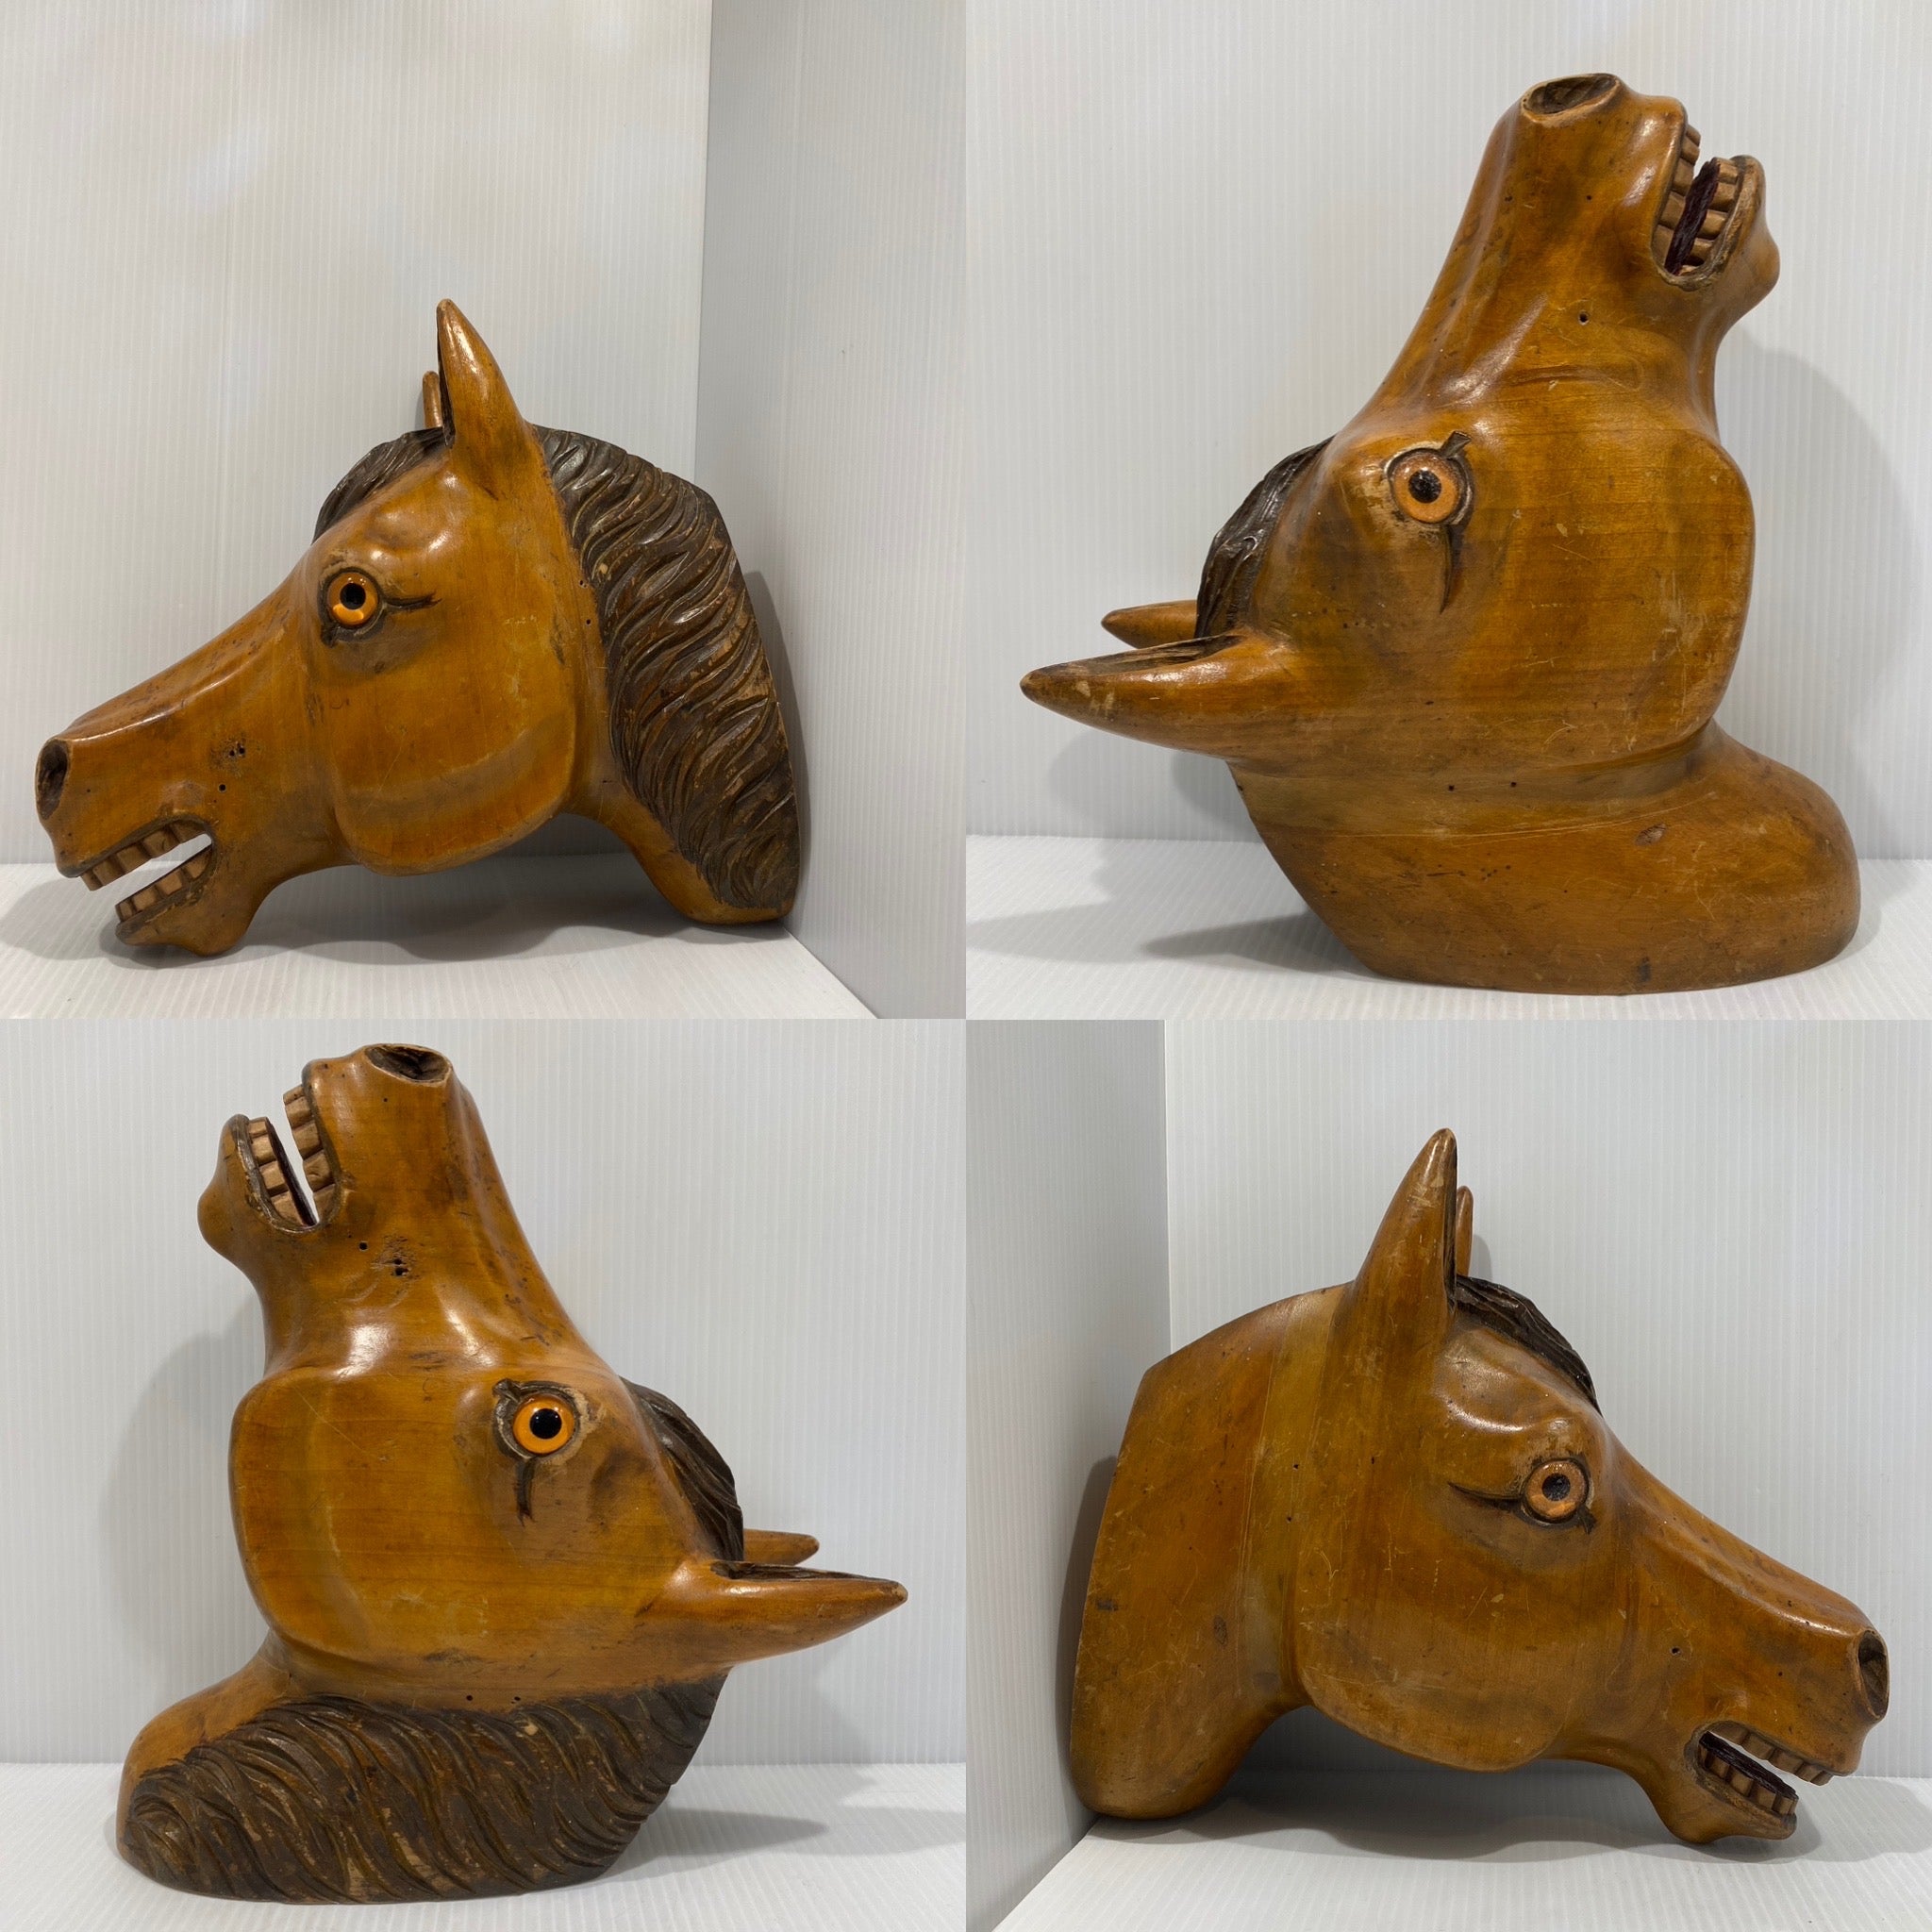 Schwarzwald hand carved, wooden horse head with glass eyes